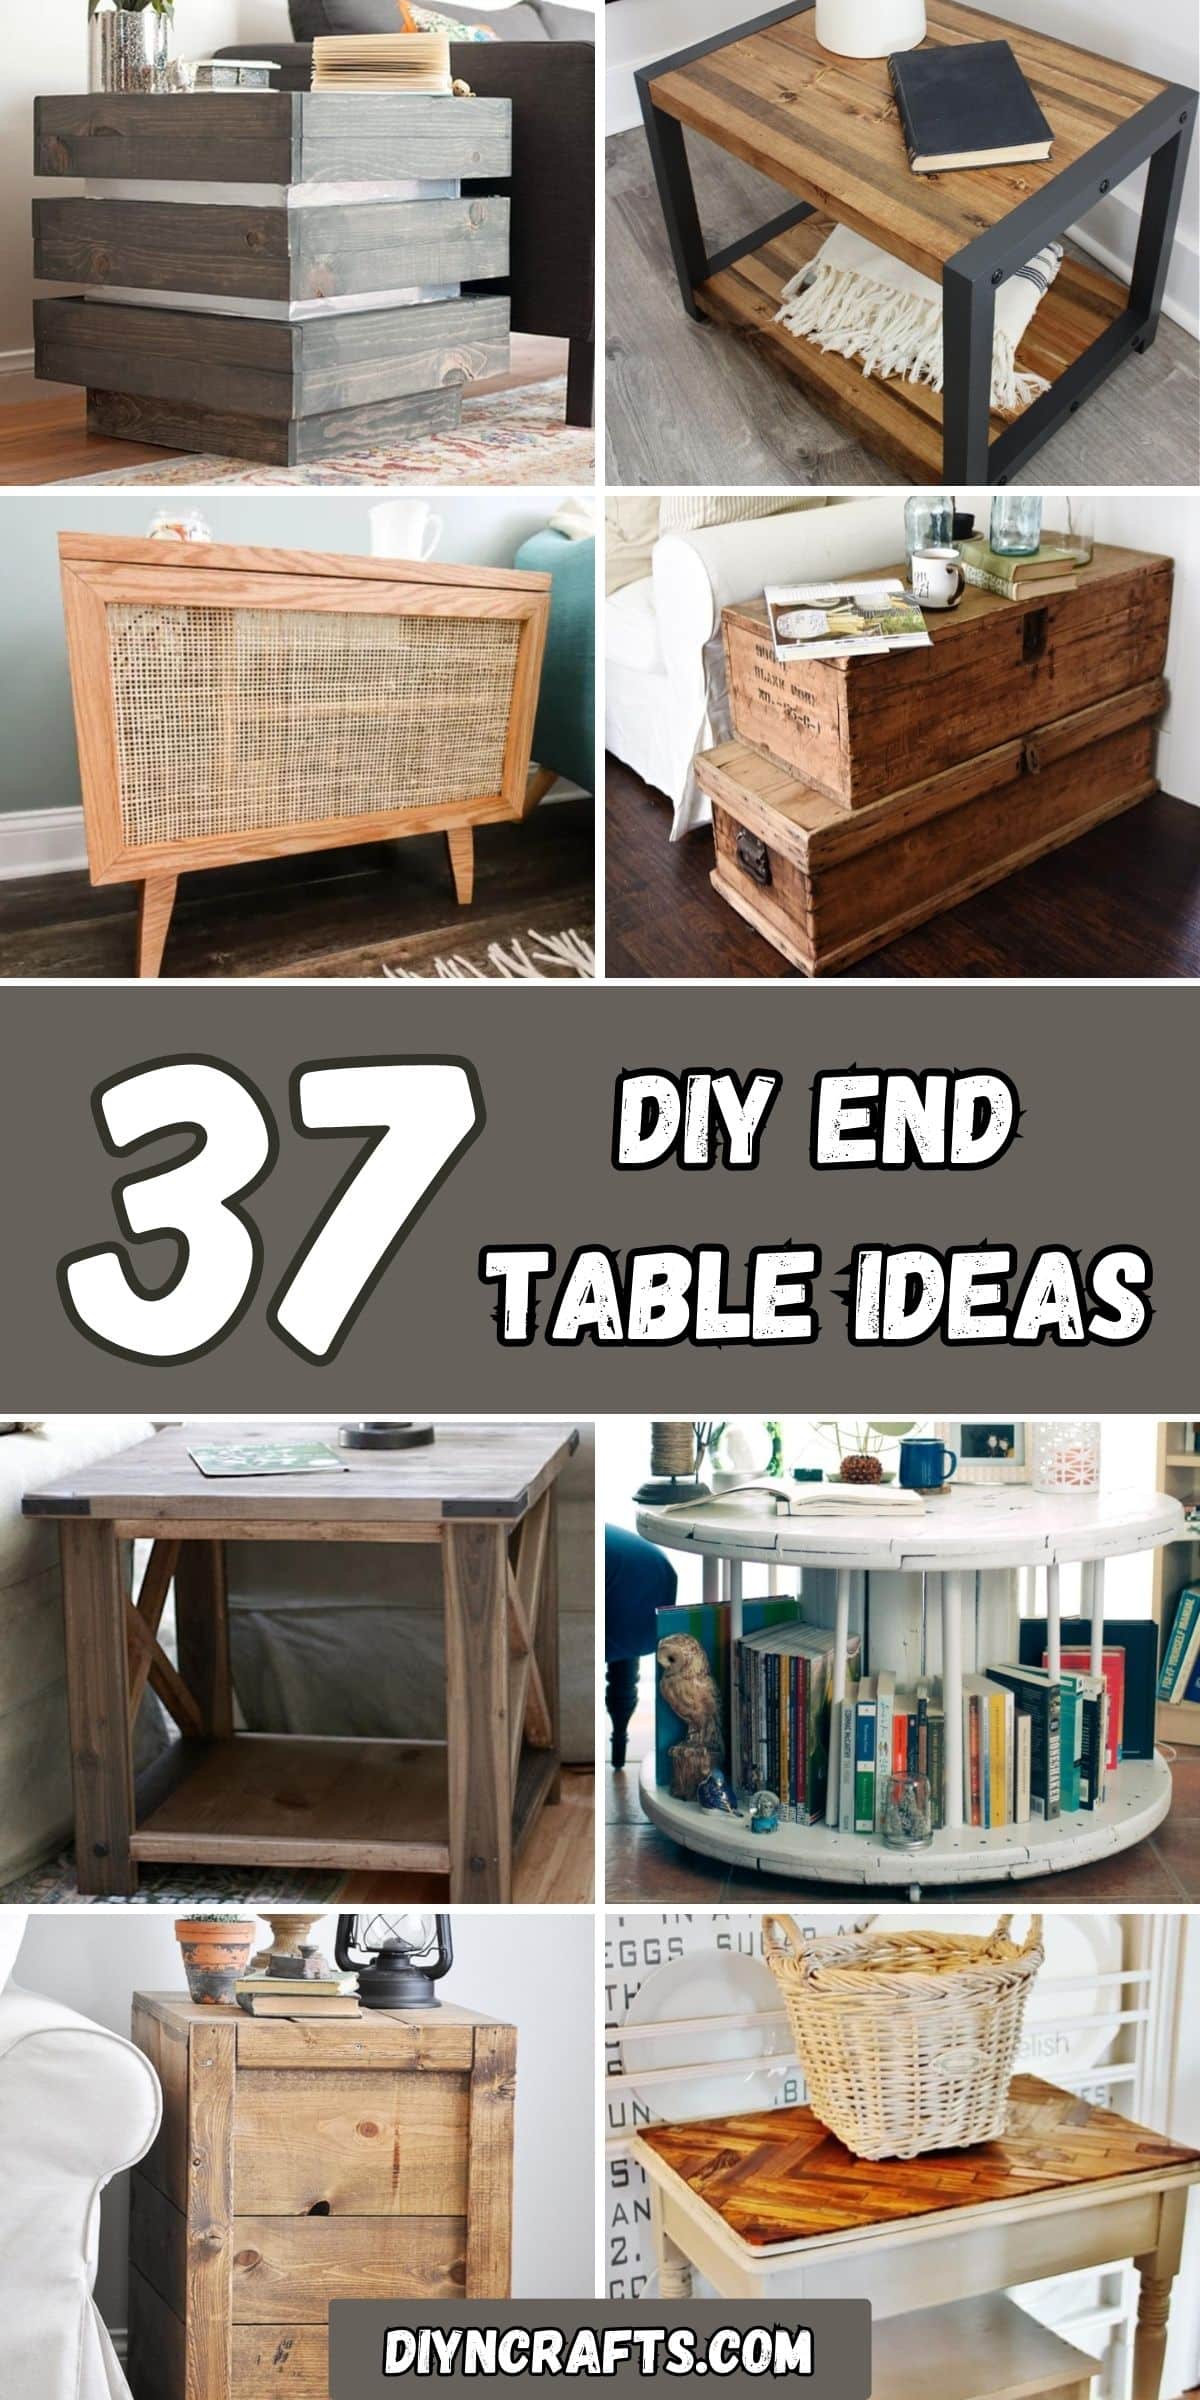 37 DIY End Table Ideas collage.